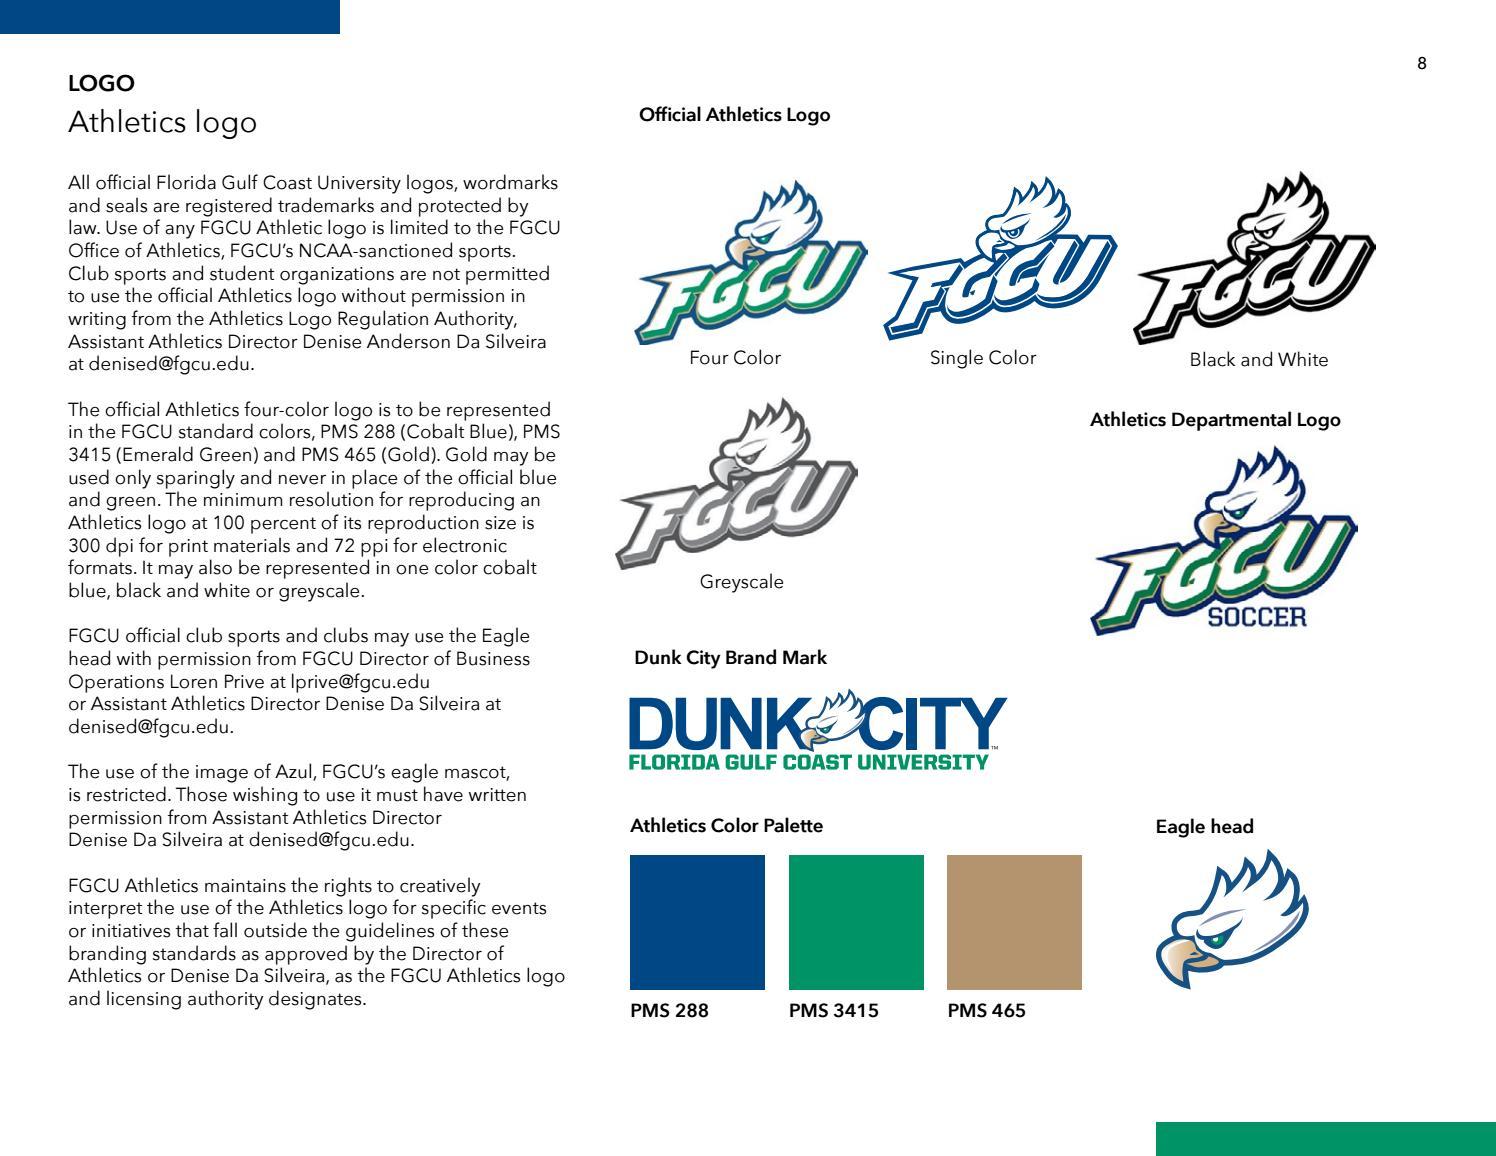 Black and White Sports Authority Logo - FGCU Visual Identity and Brand Guidelines 2017 by Florida Gulf Coast